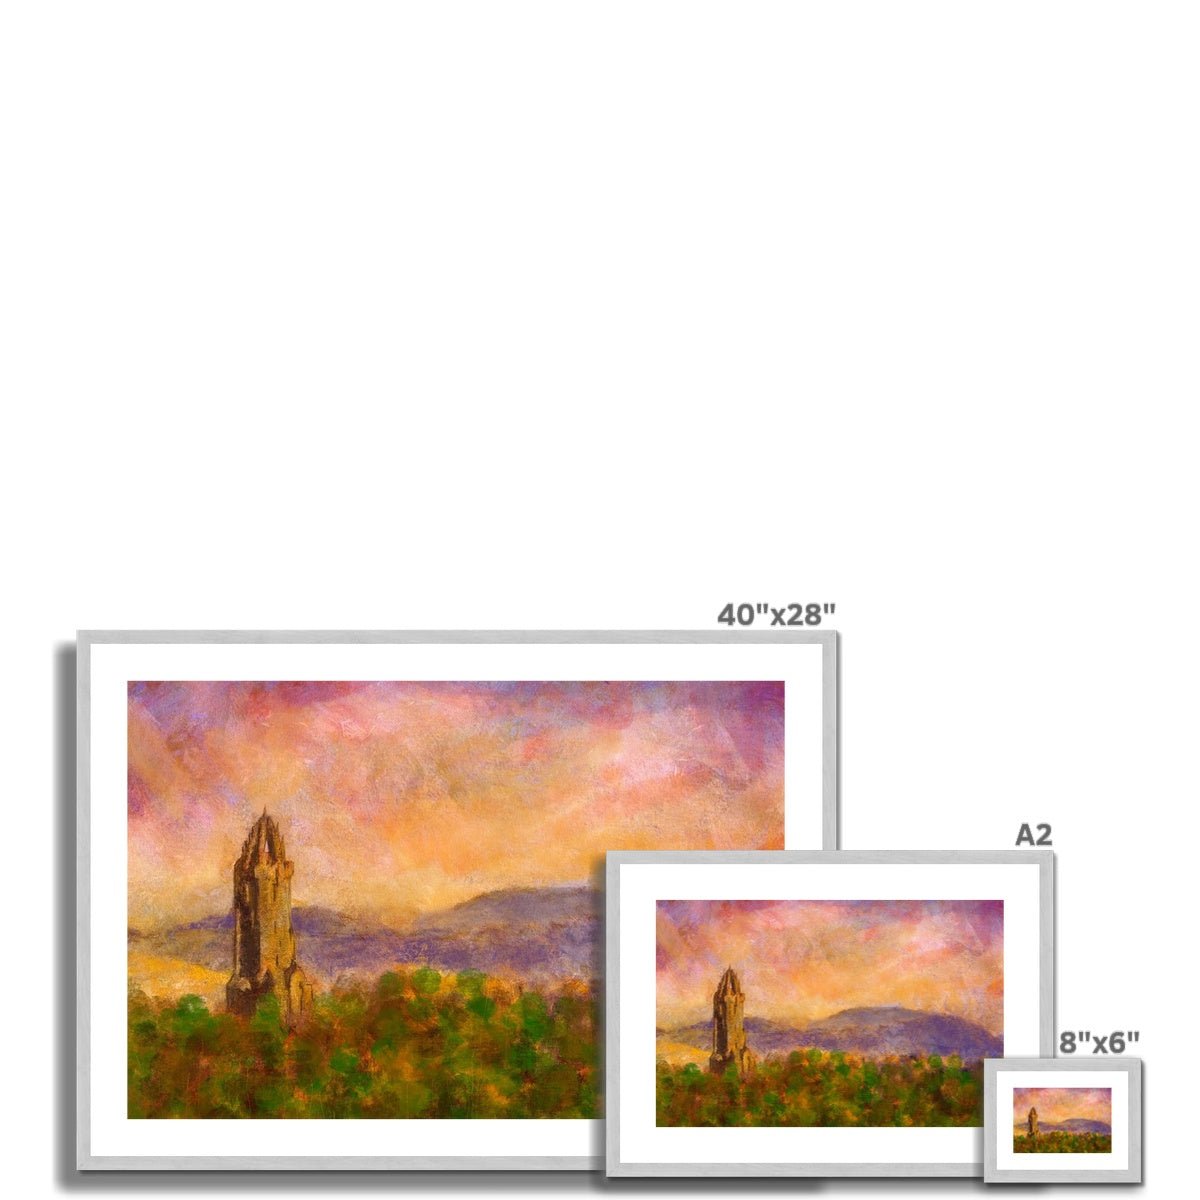 Wallace Monument Dusk Painting | Antique Framed & Mounted Prints From Scotland-Antique Framed & Mounted Prints-Historic & Iconic Scotland Art Gallery-Paintings, Prints, Homeware, Art Gifts From Scotland By Scottish Artist Kevin Hunter